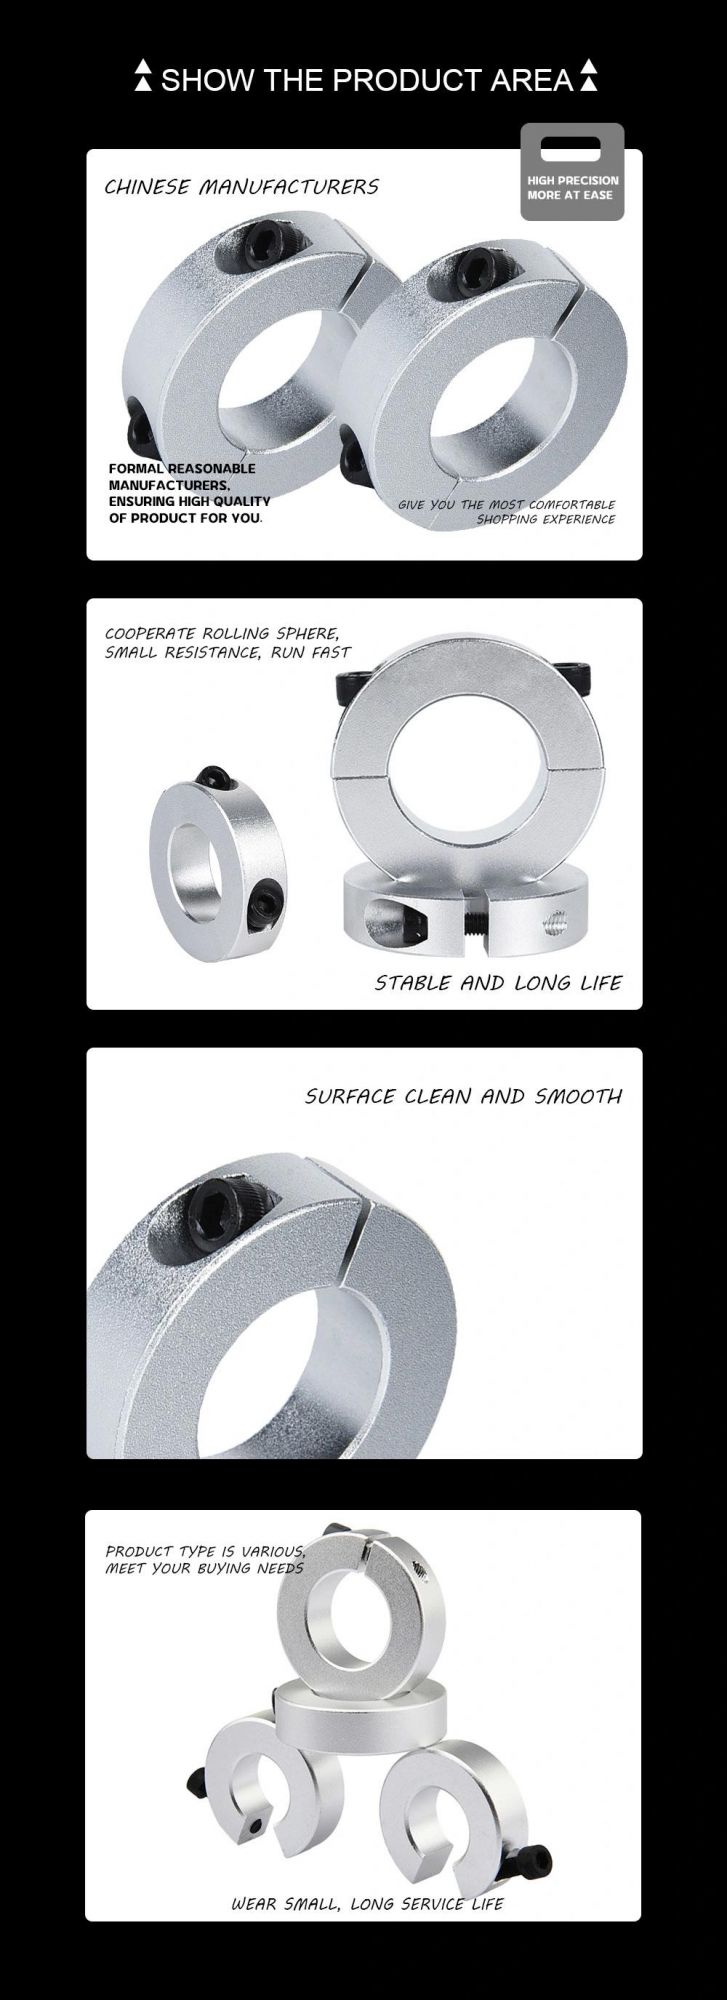 Standard Processed Products Automation Equipment Parts Fixing Ring Aluminum Alloy Optical Axis Holder Economical Instead of Mismi Yiheda